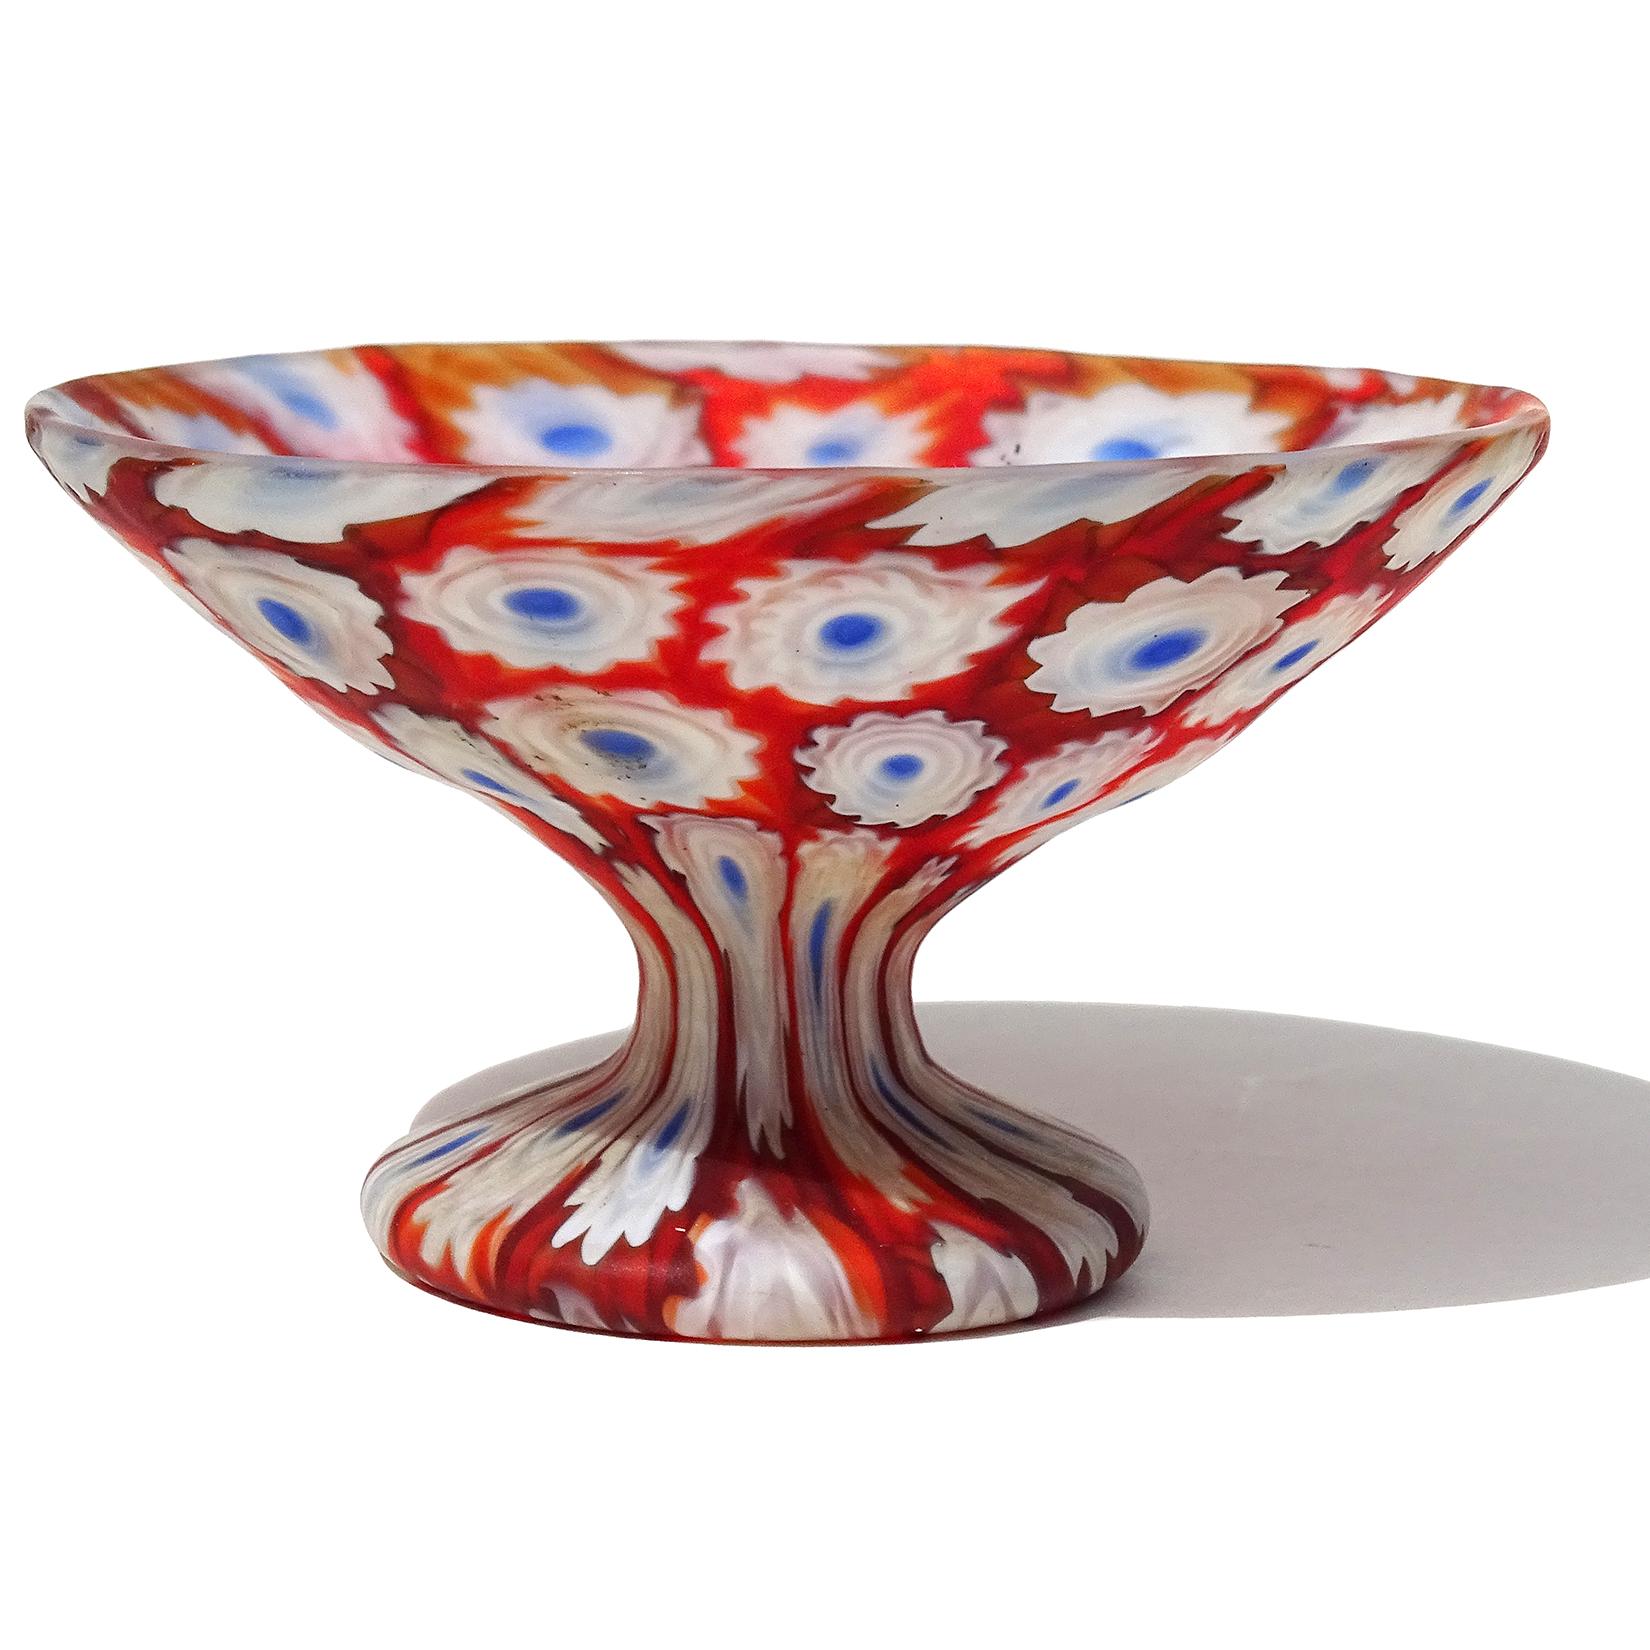 Beautiful antique murano hand blown red, white and blue millefiori flower mosaic Italian art glass decorative footed bowl / cup. Documented to the Fratelli Toso company, circa 1910-1930. Great contrasting colors. Would make a great ring dish. Art